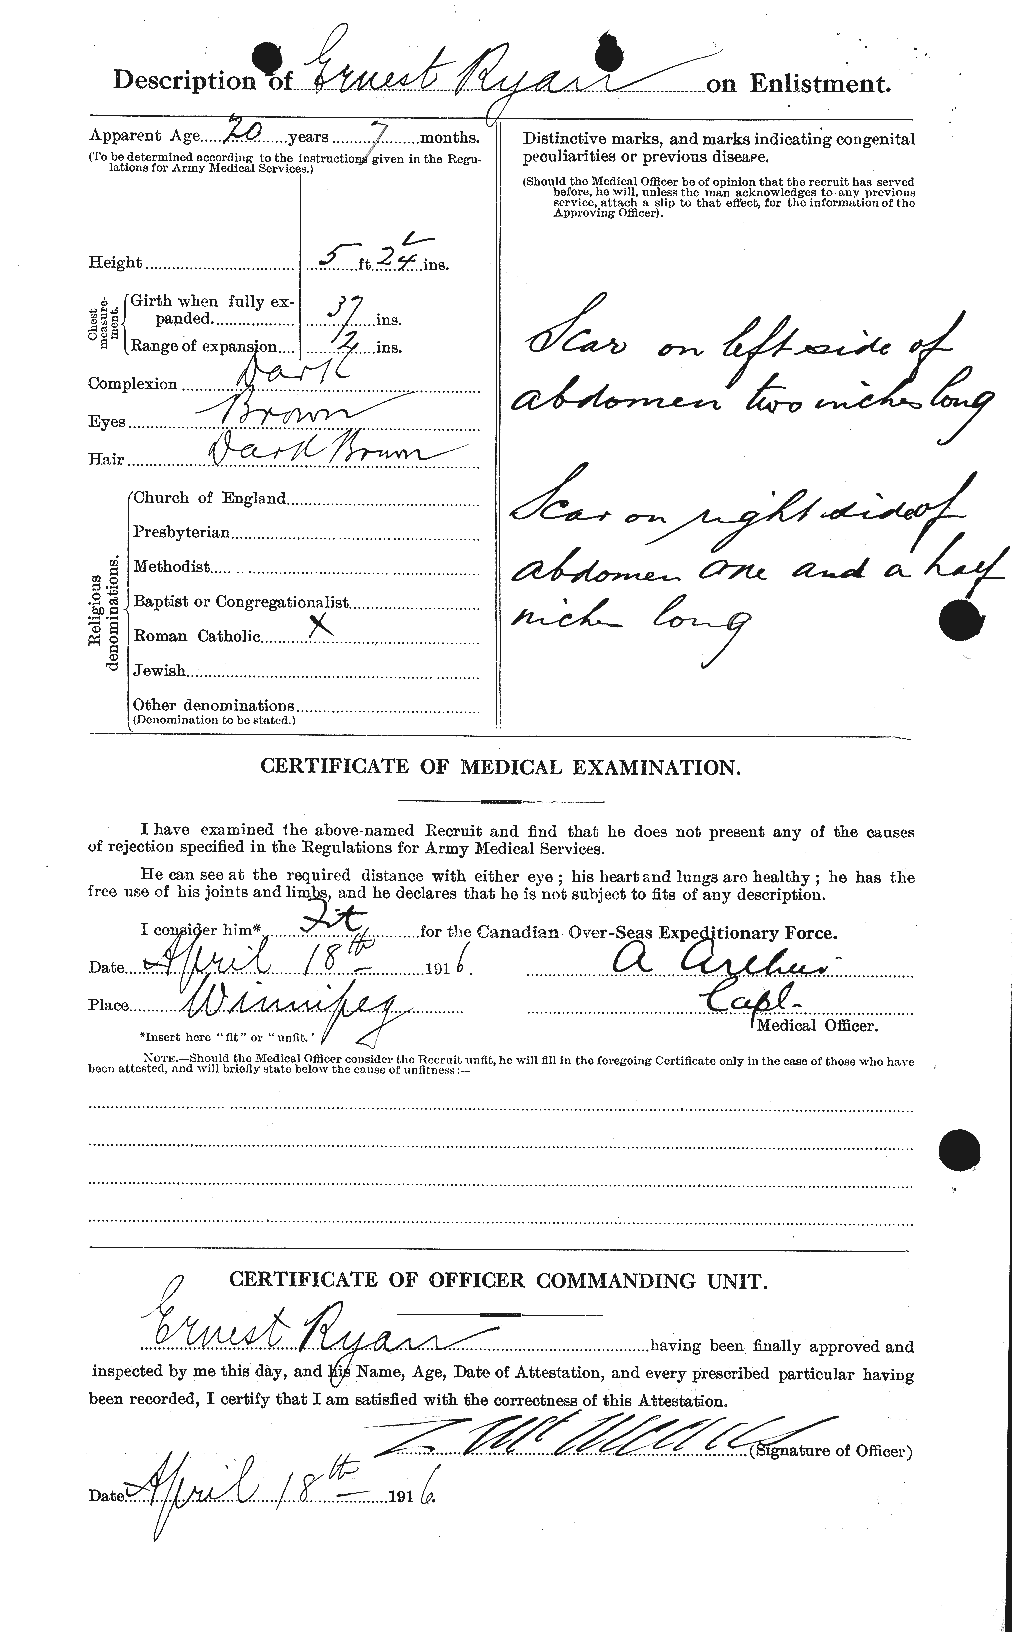 Personnel Records of the First World War - CEF 620216b